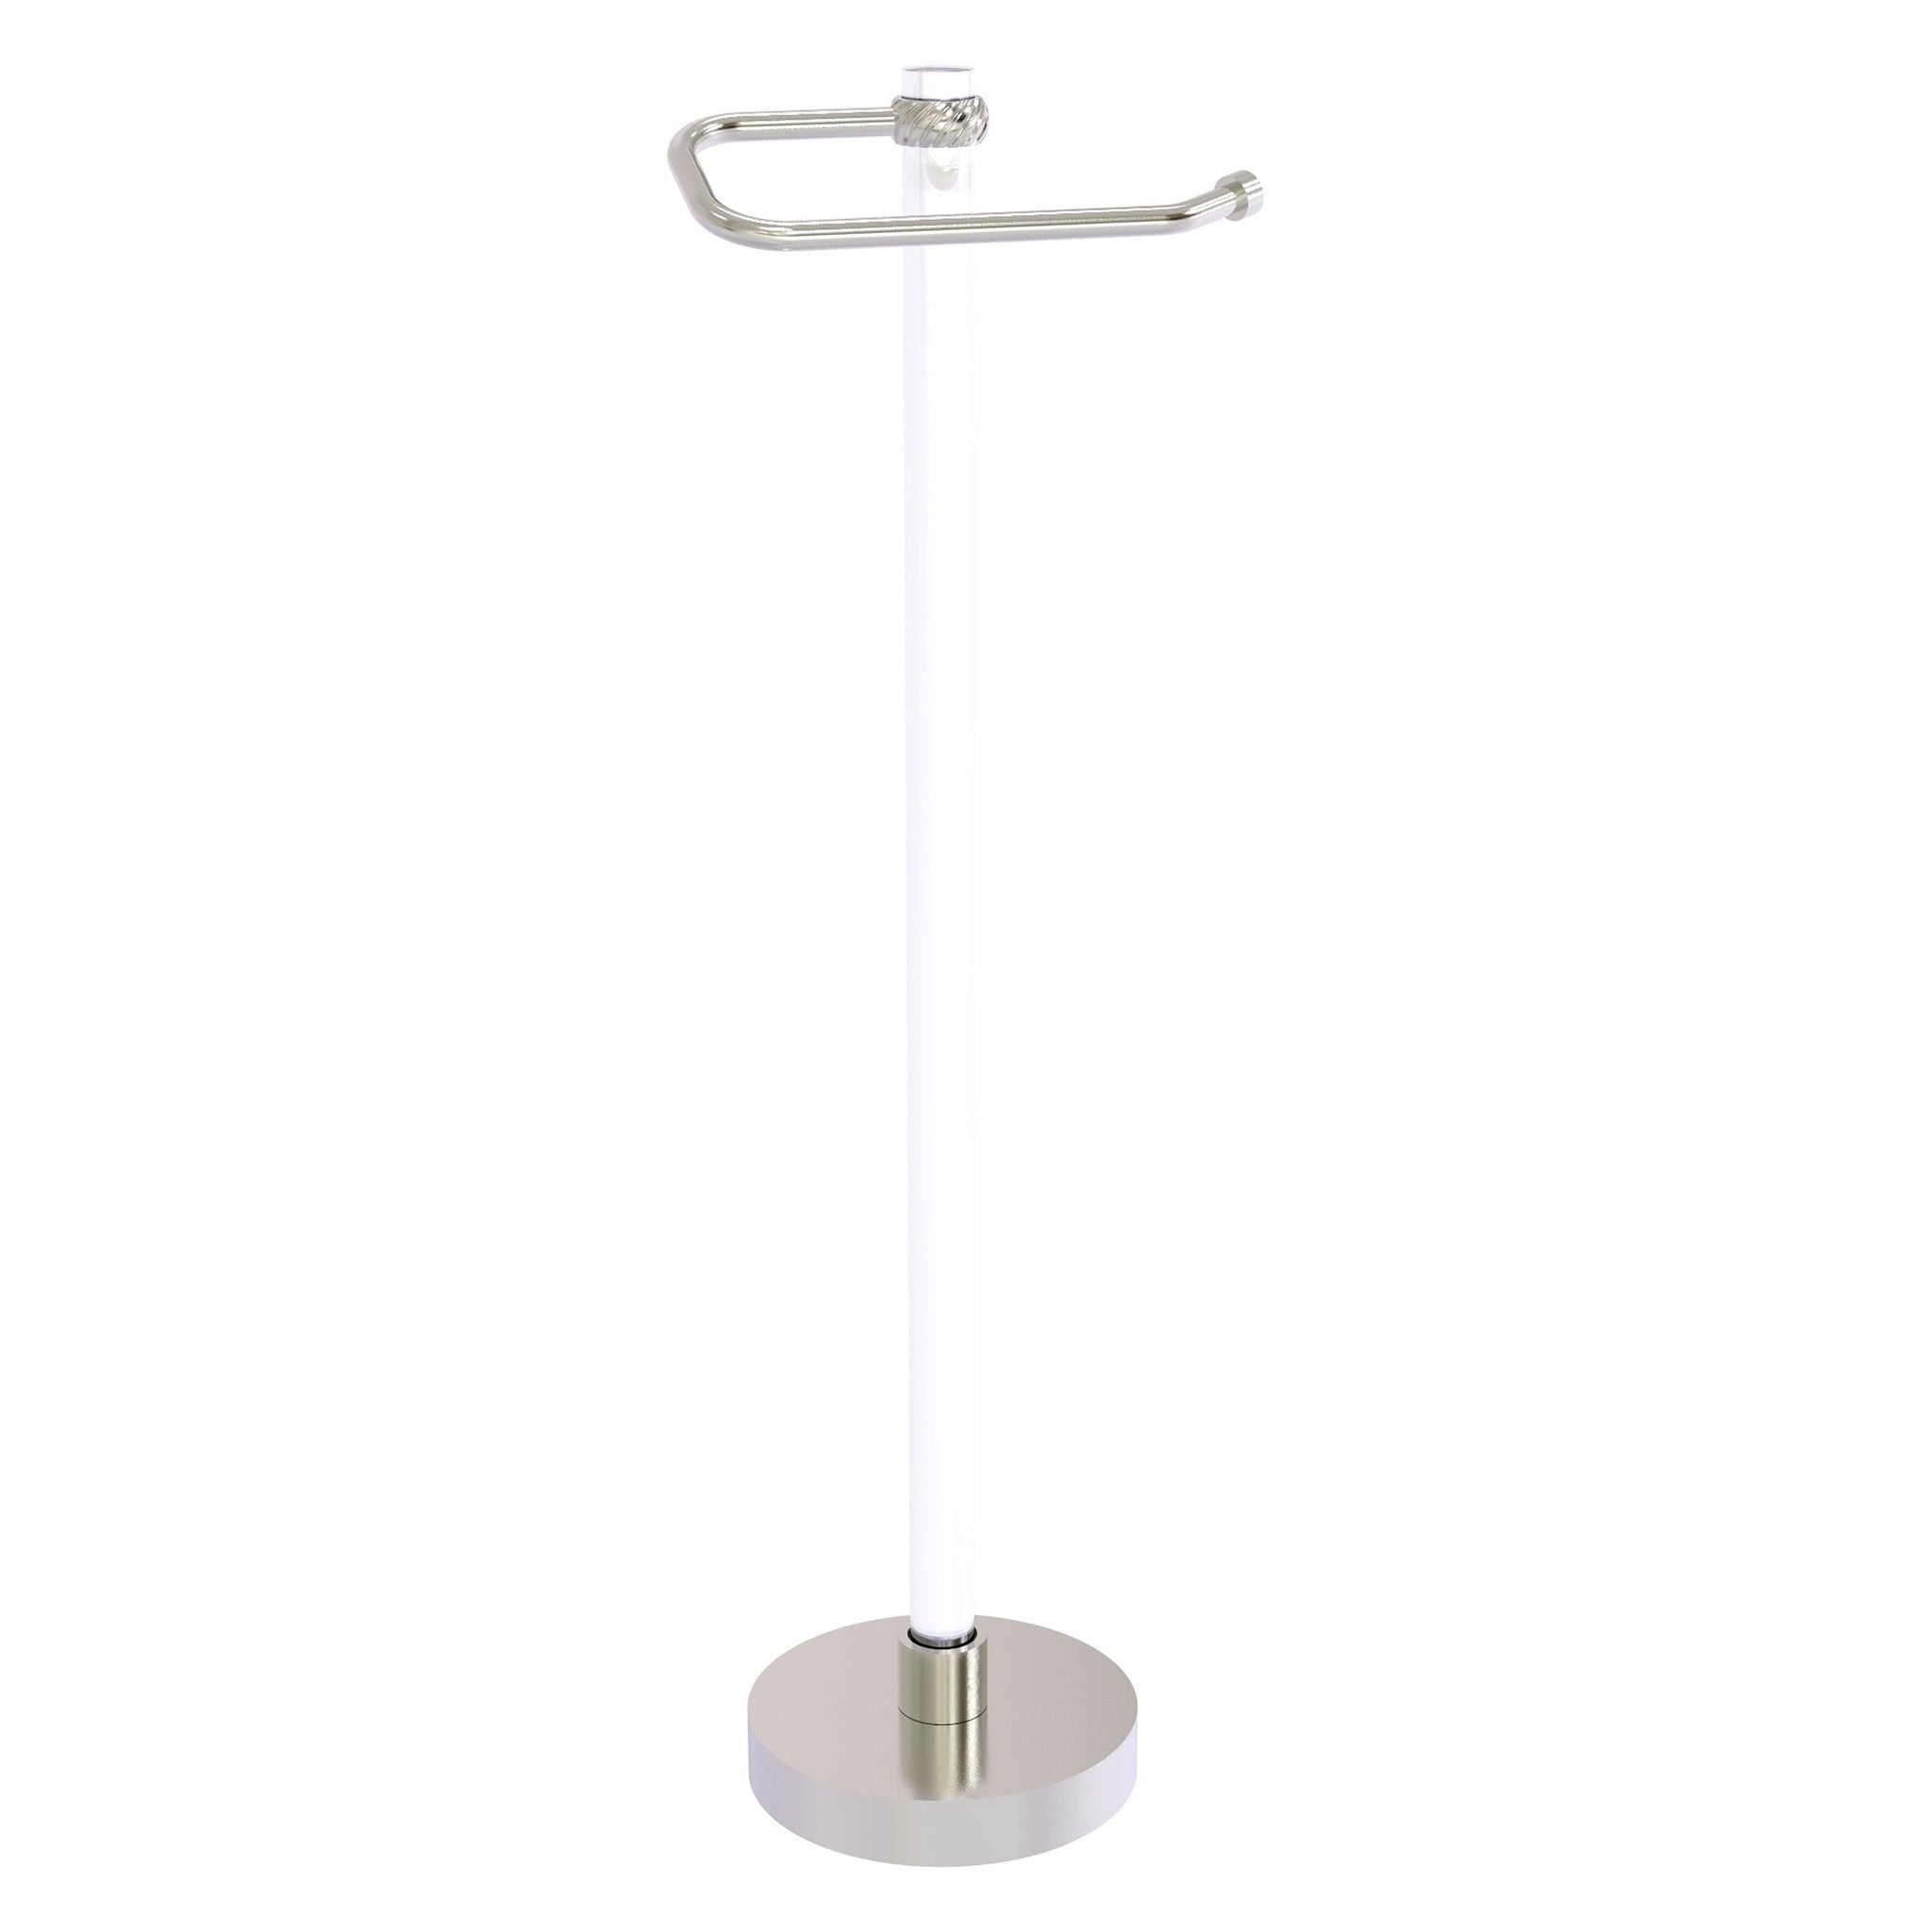 http://usbathstore.com/cdn/shop/files/Allied-Brass-Clearview-7_6-x-6_1-Satin-Nickel-Solid-Brass-Euro-Style-Free-Standing-Toilet-Paper-Holder-With-Twisted-Accents.jpg?v=1698560776